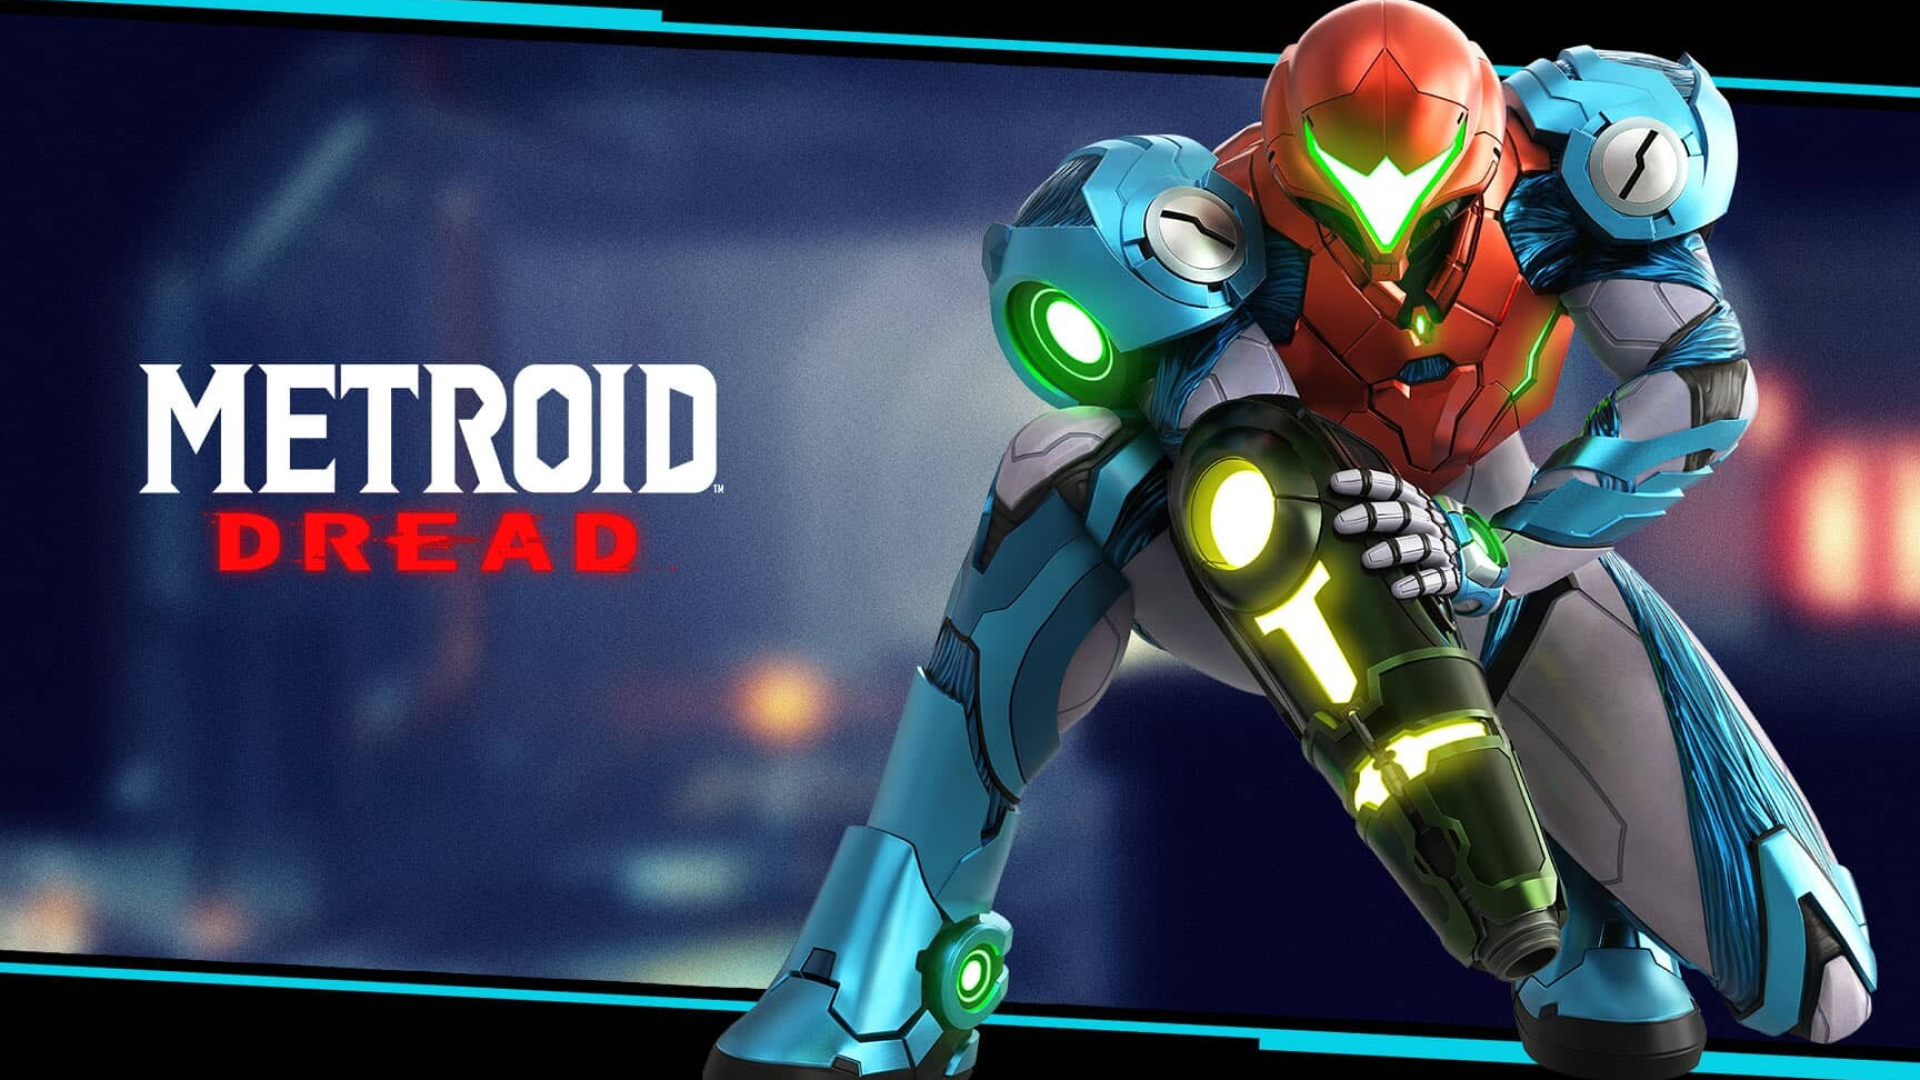 Metroid Dread: The game has been nominated for EE Game of the Year at the 2022 BAFTA Games Awards. 1920x1080 Full HD Wallpaper.